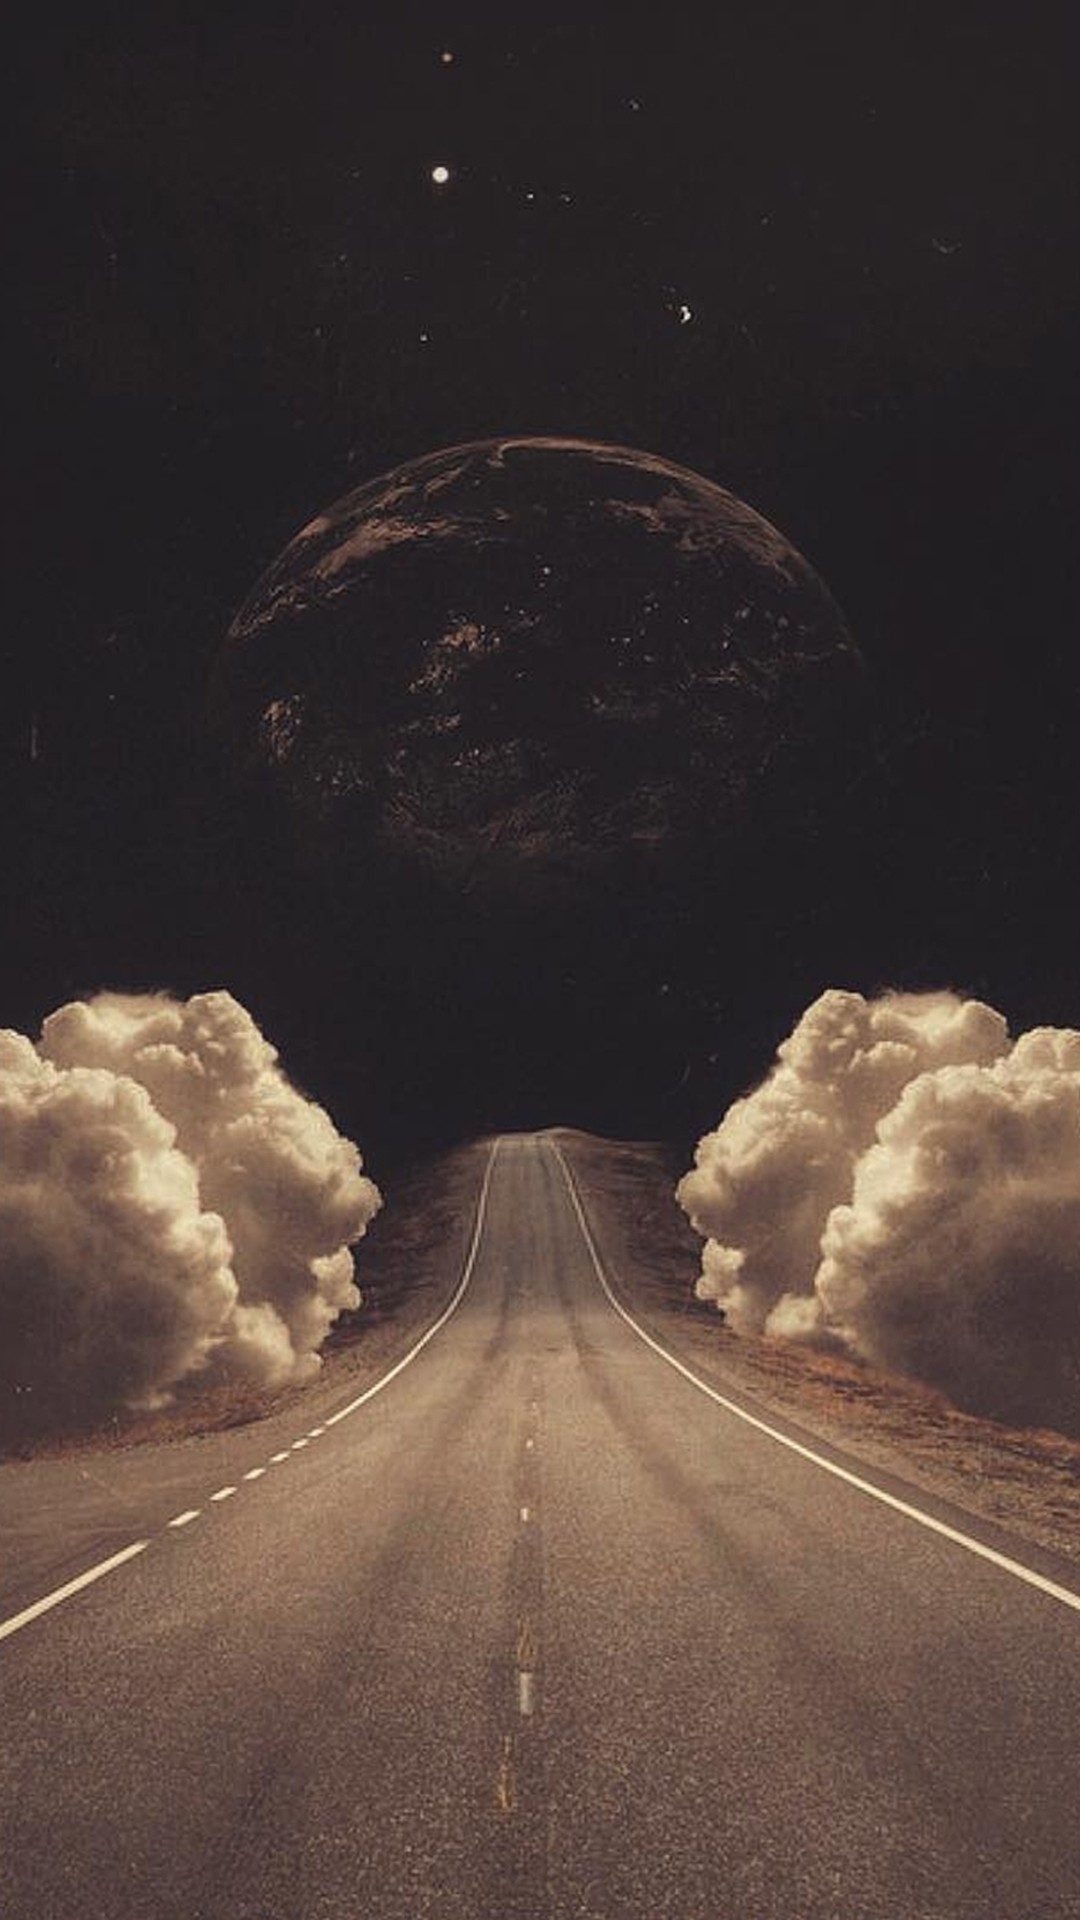 1080x1920 Surreal Art Collage Road Clouds Planet iPhone 8 wallpaper